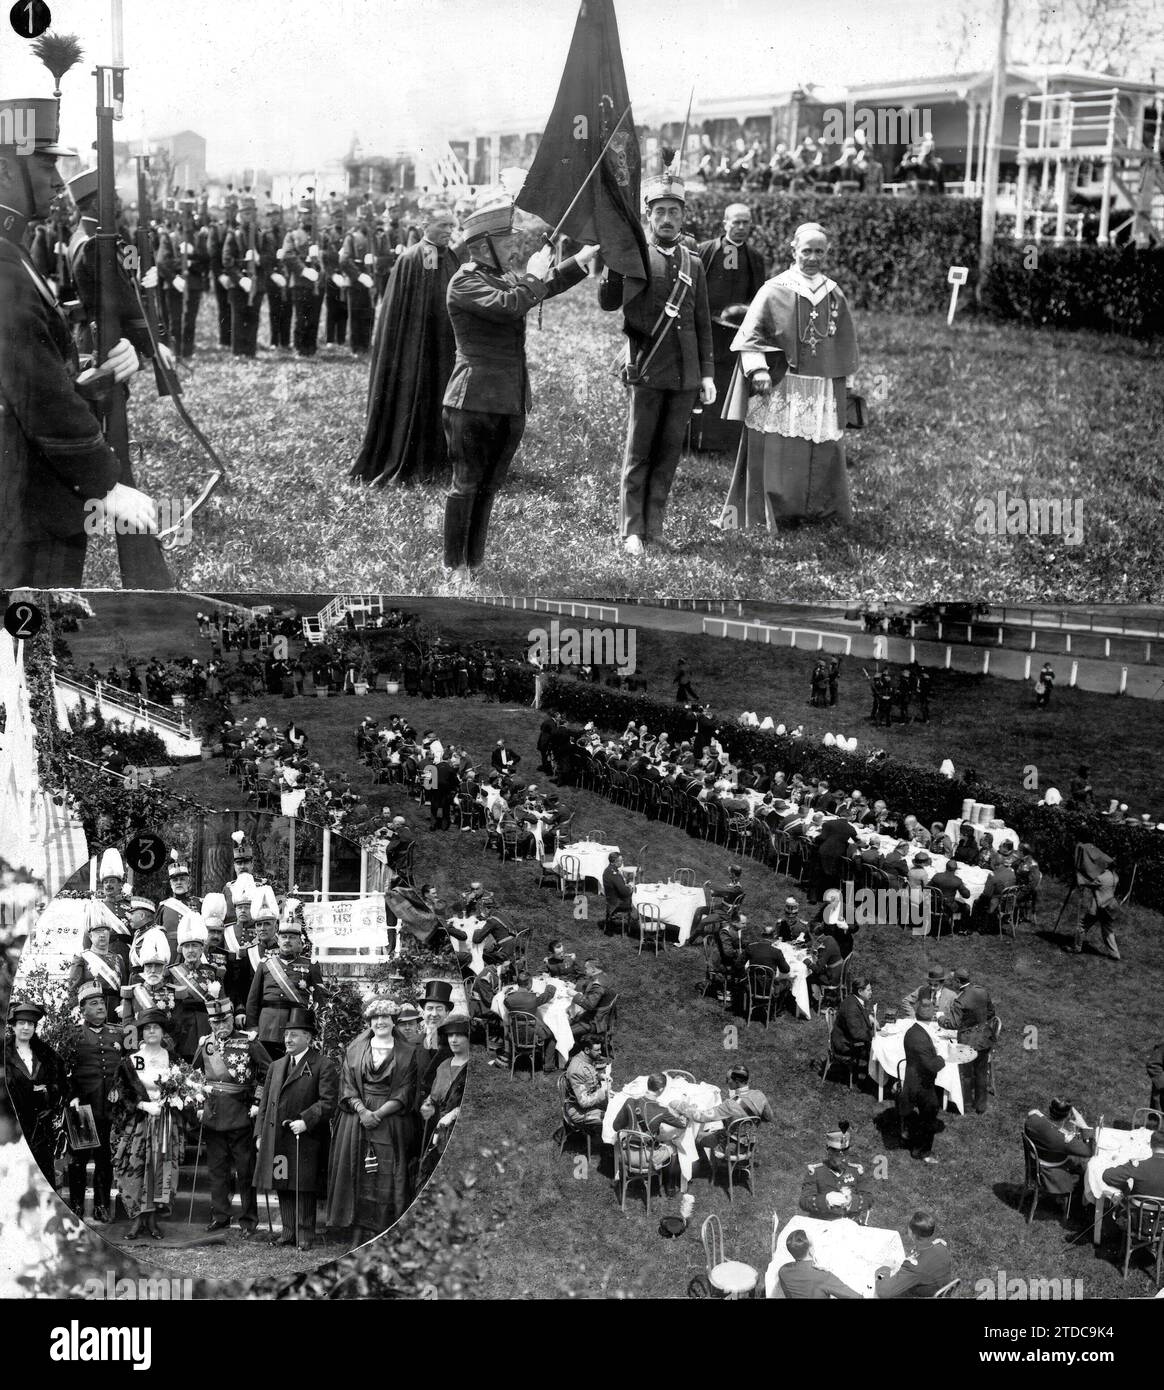 04/21/1920. Madrid. In yesterday's military solemnity. Flag oath by the Recruits of the Savoy regiment .1.The Bishop of Sion Taking the oath To the Soldiers.2. 'the Lunch'.3. The Italian ambassador and his wife with the Captain General's cousin Rivera and Other Distinguished Guests at the event. Credit: Album / Archivo ABC / José Zegri Stock Photo